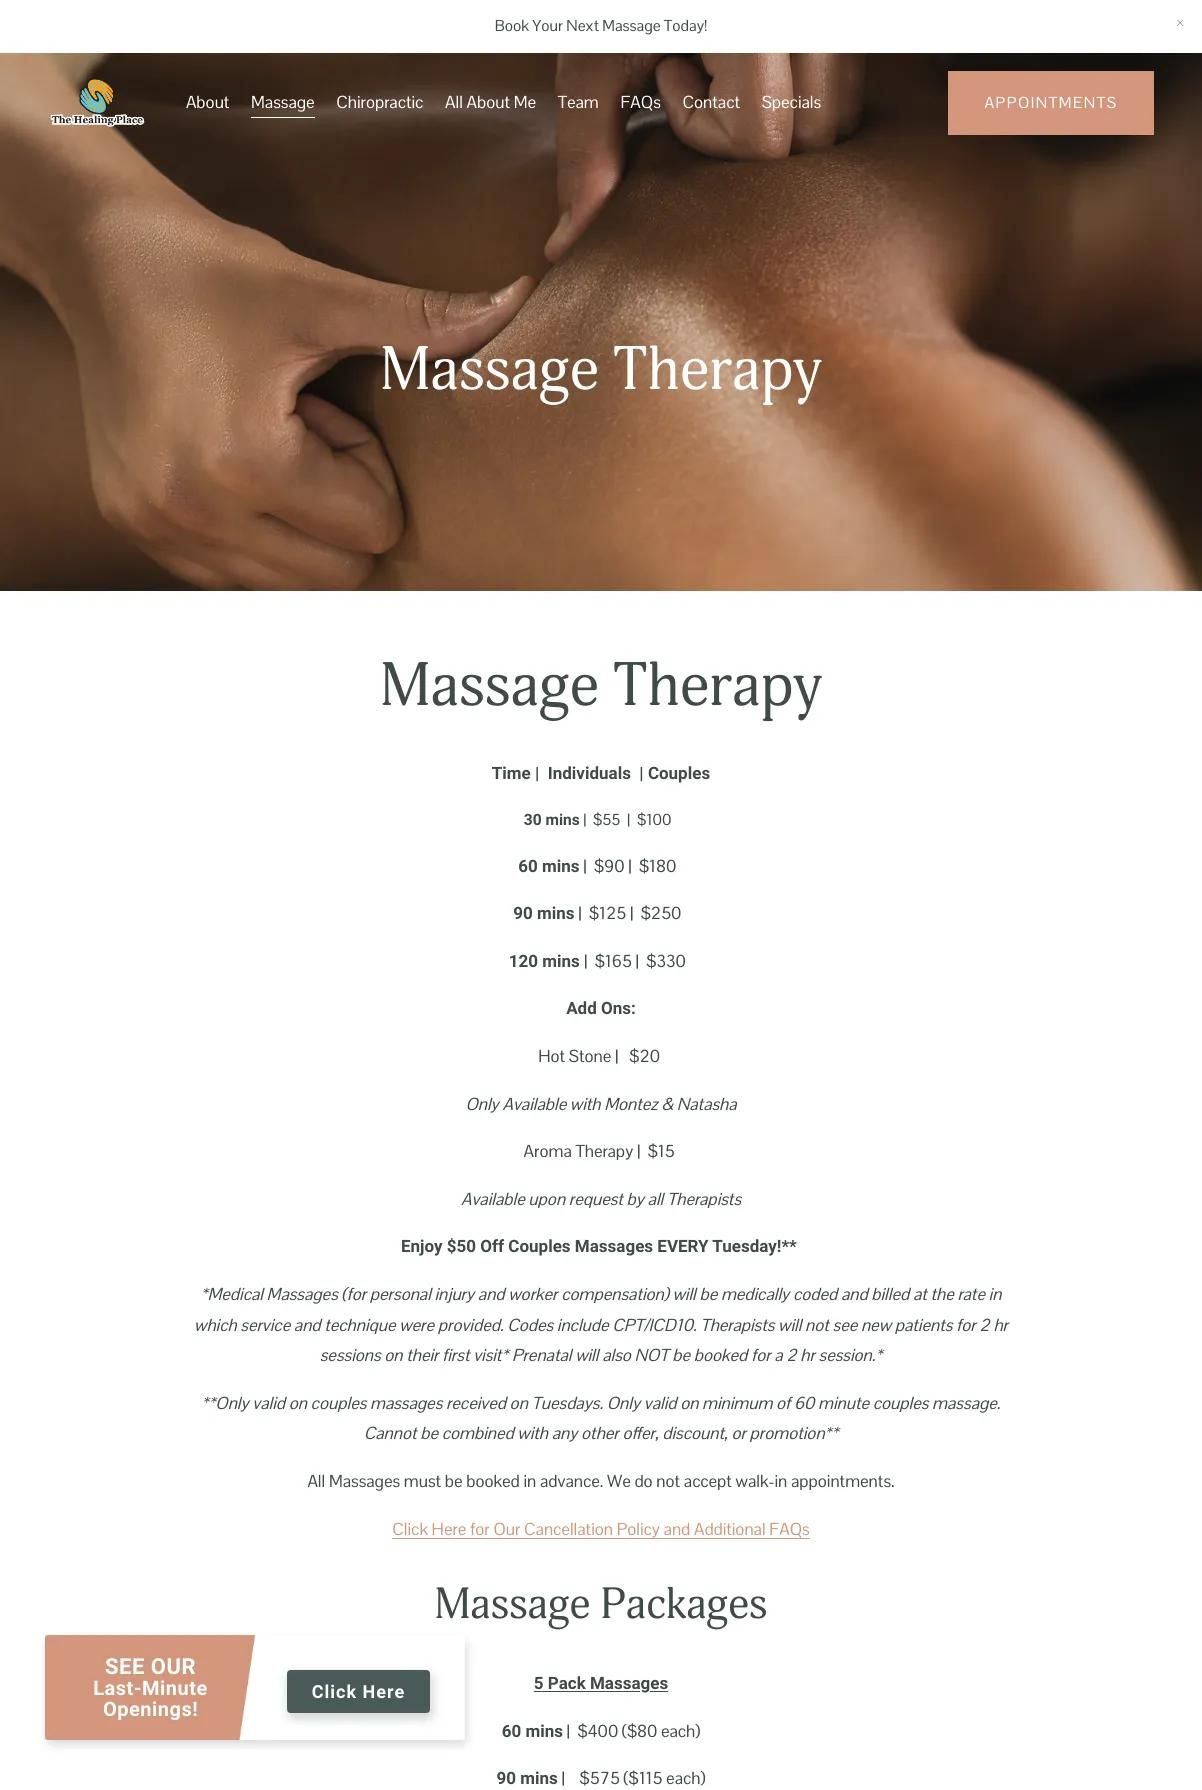 Screenshot 2 of The Healing Place (Example Squarespace Esthetician Website)